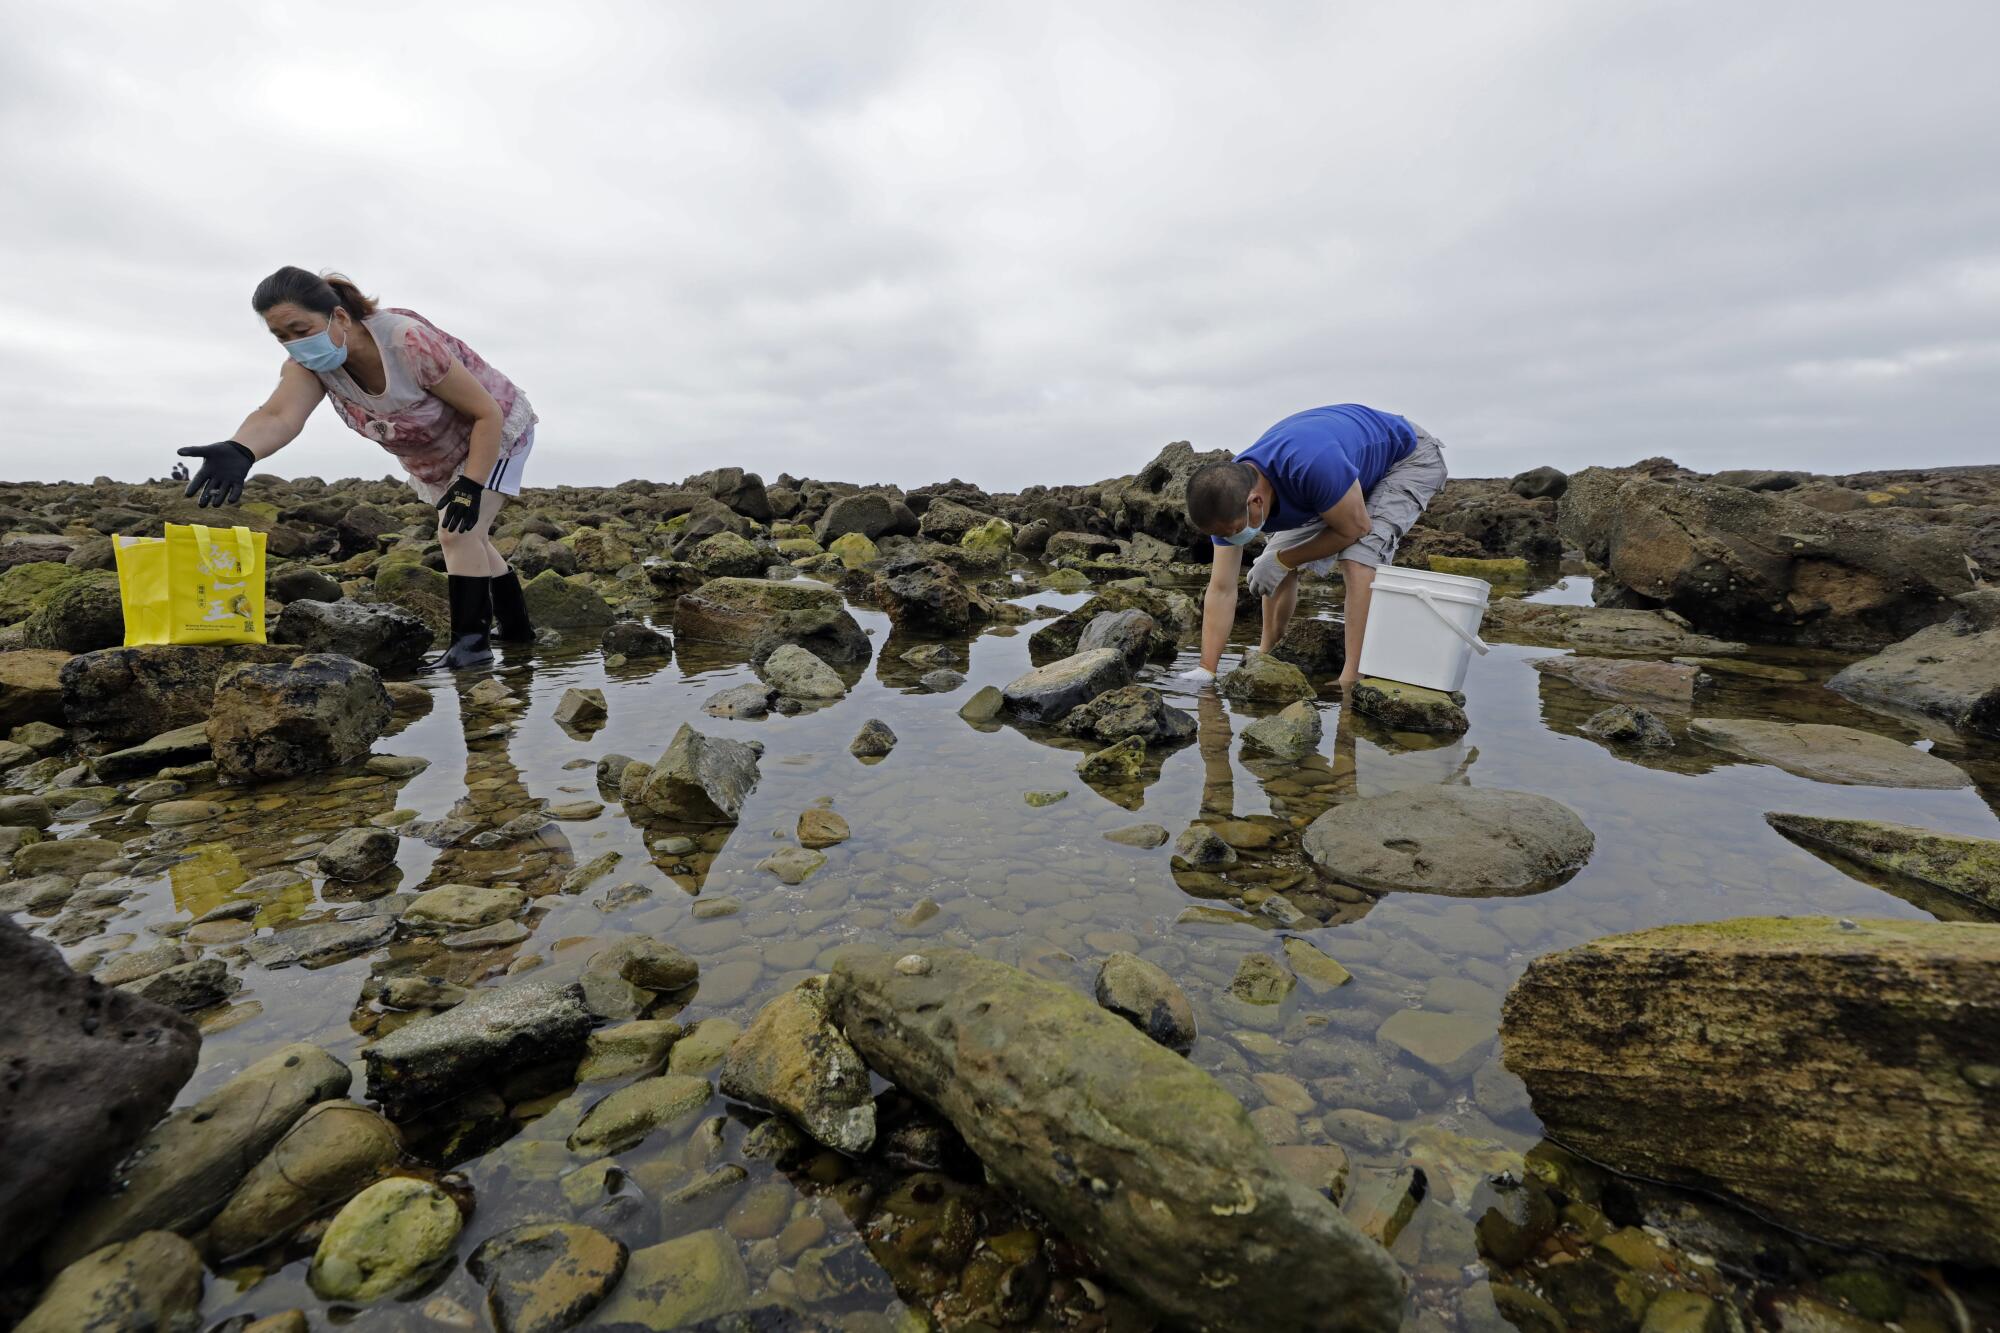 Two people harvest marine creatures at a tide pool